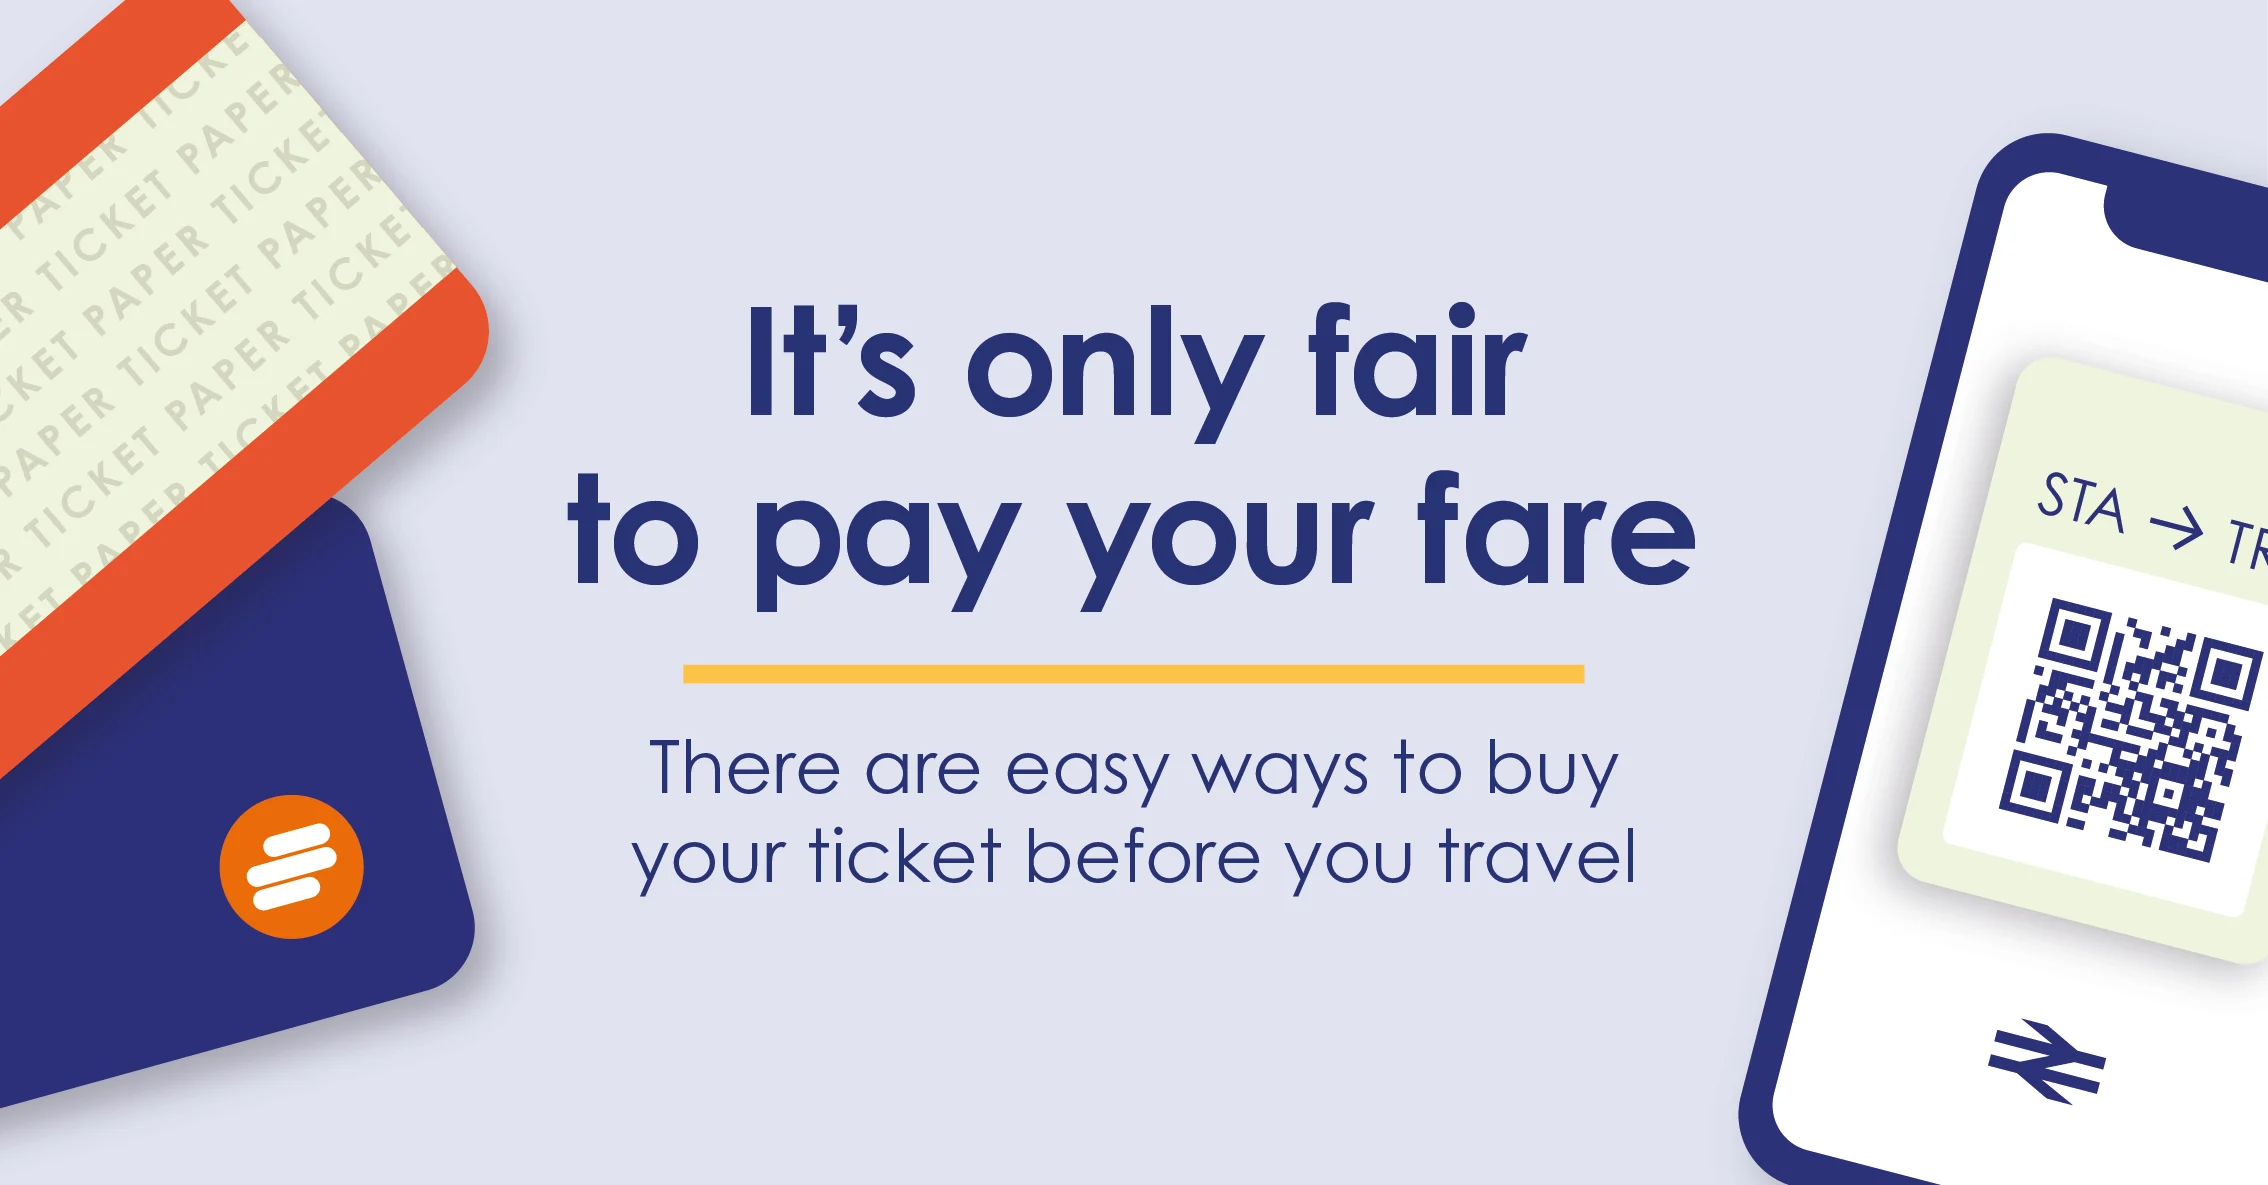 Text of penalty fare warning advert, which reads "It's only fair to pay your fare. There are easy way to buy your ticket before you travel."